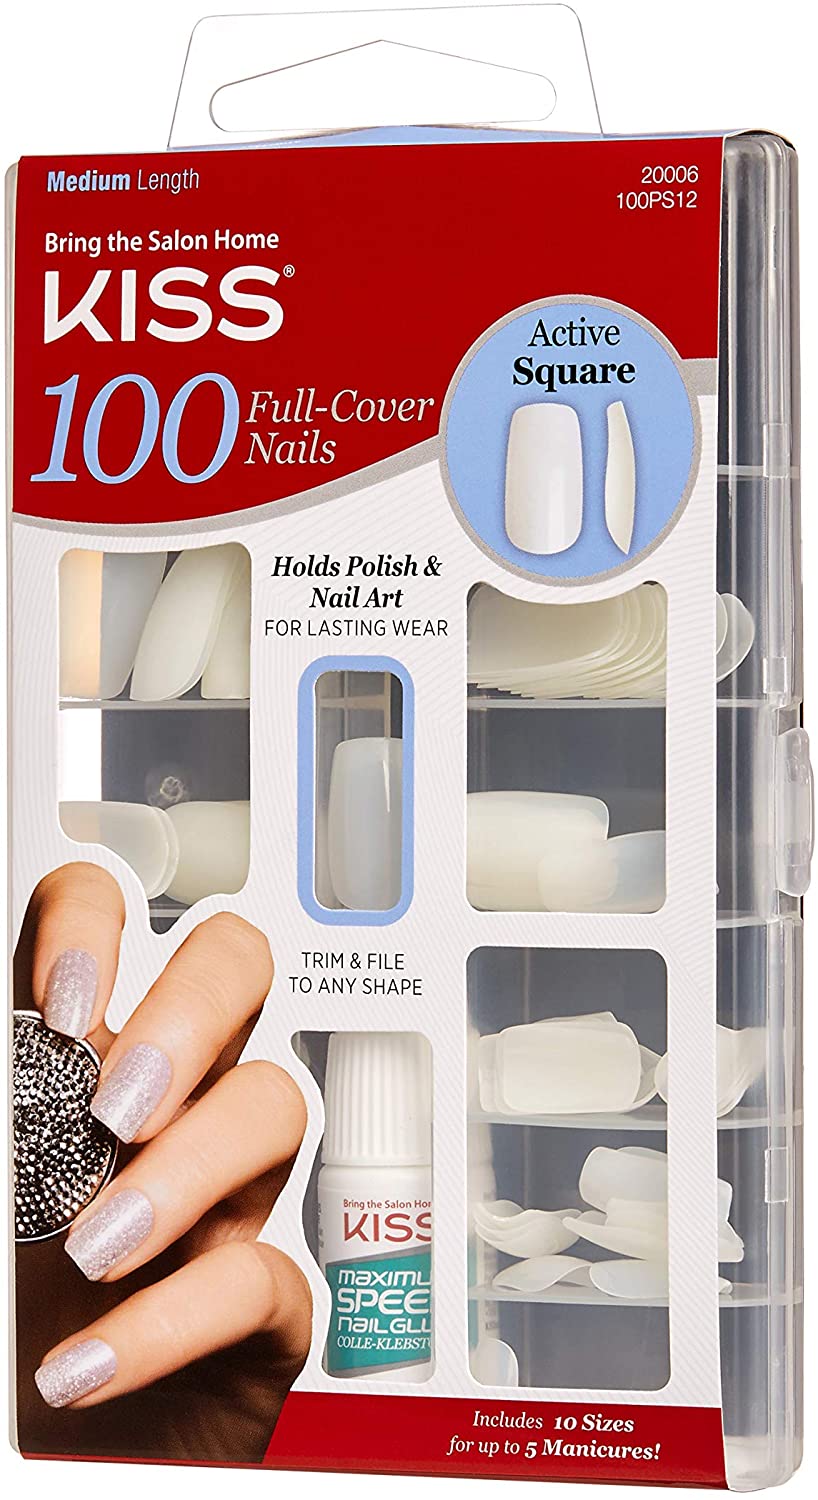 100 Full Cover Nails - Active Square